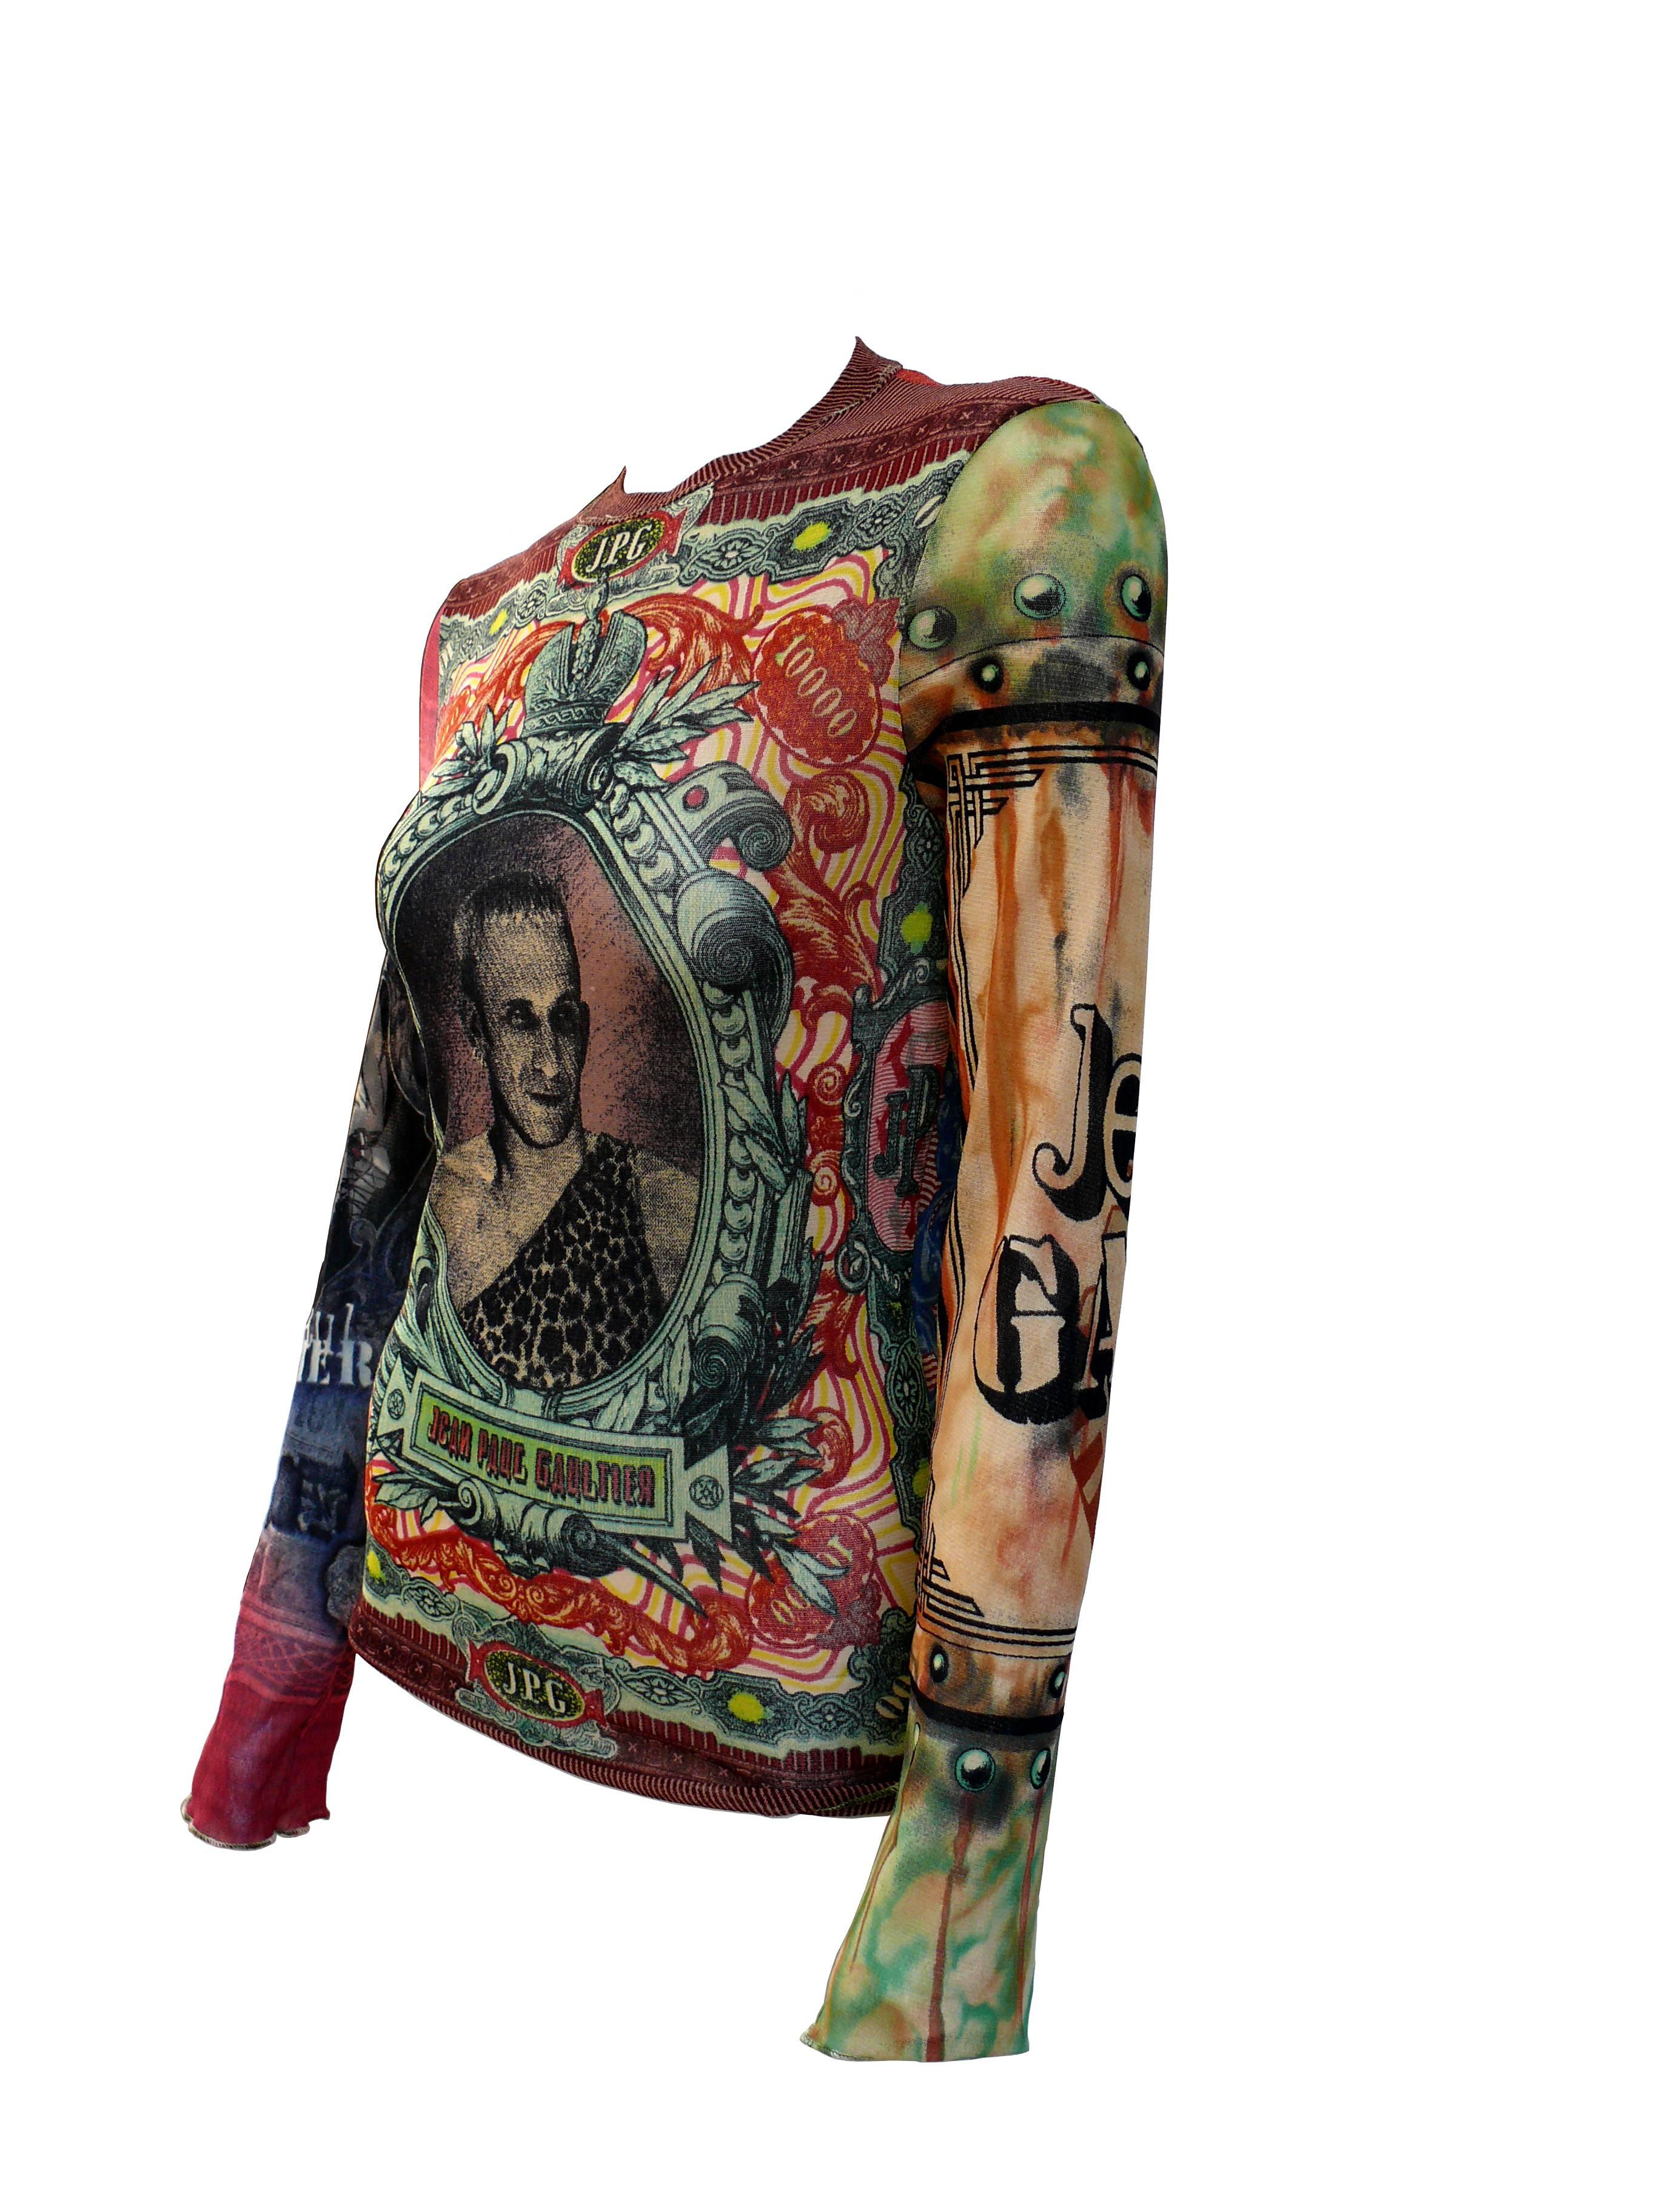 JEAN PAUL GAULTIER vintage unisex self portrait tattoo Fuzzi mesh top, featuring an opulent decor with vibrant colors.

Label reads Jean Paul Gaultier Maille Made in Italy.

Size tag reads : XL.
Please refer to measurements.

Composition tag